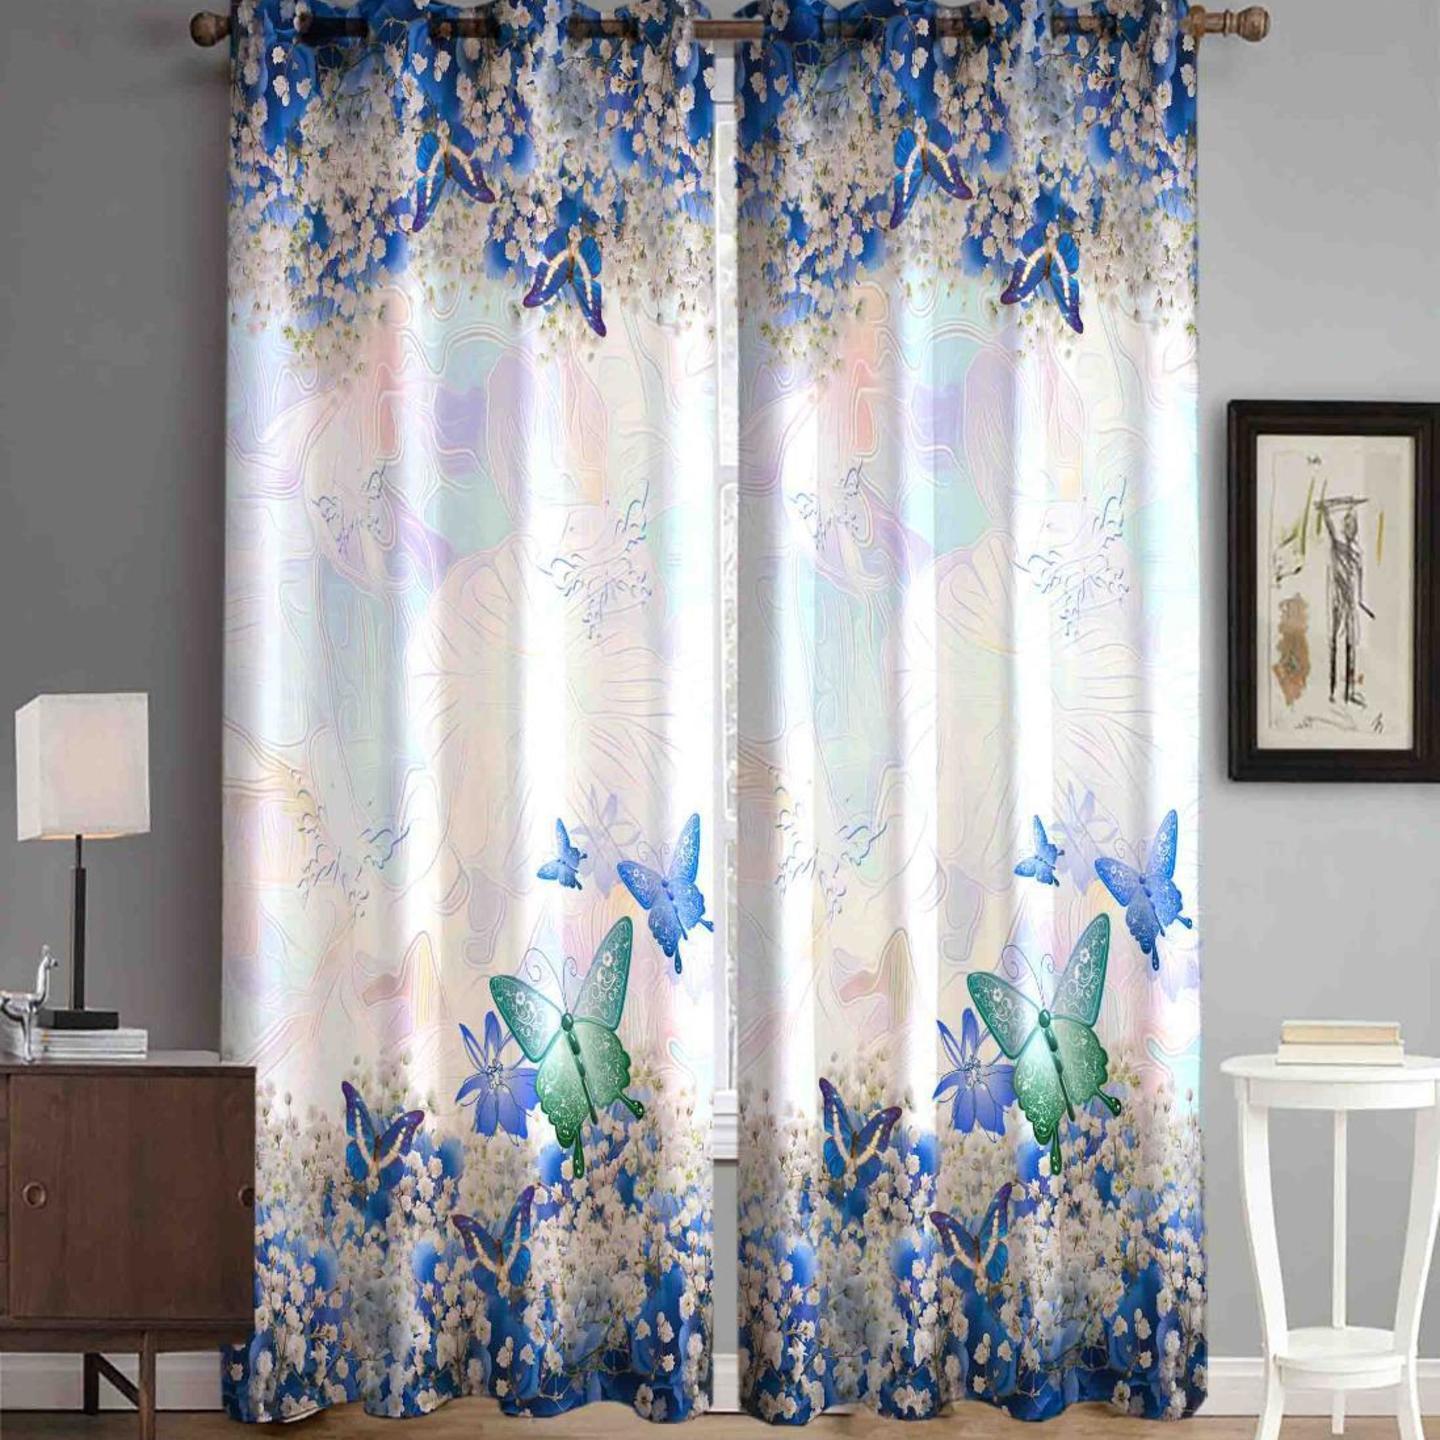 Handtex Home  Polyester Butterfly Digital Printed Curtain 4x7 Feet Multi Colour Set of 2 Pc Curtain